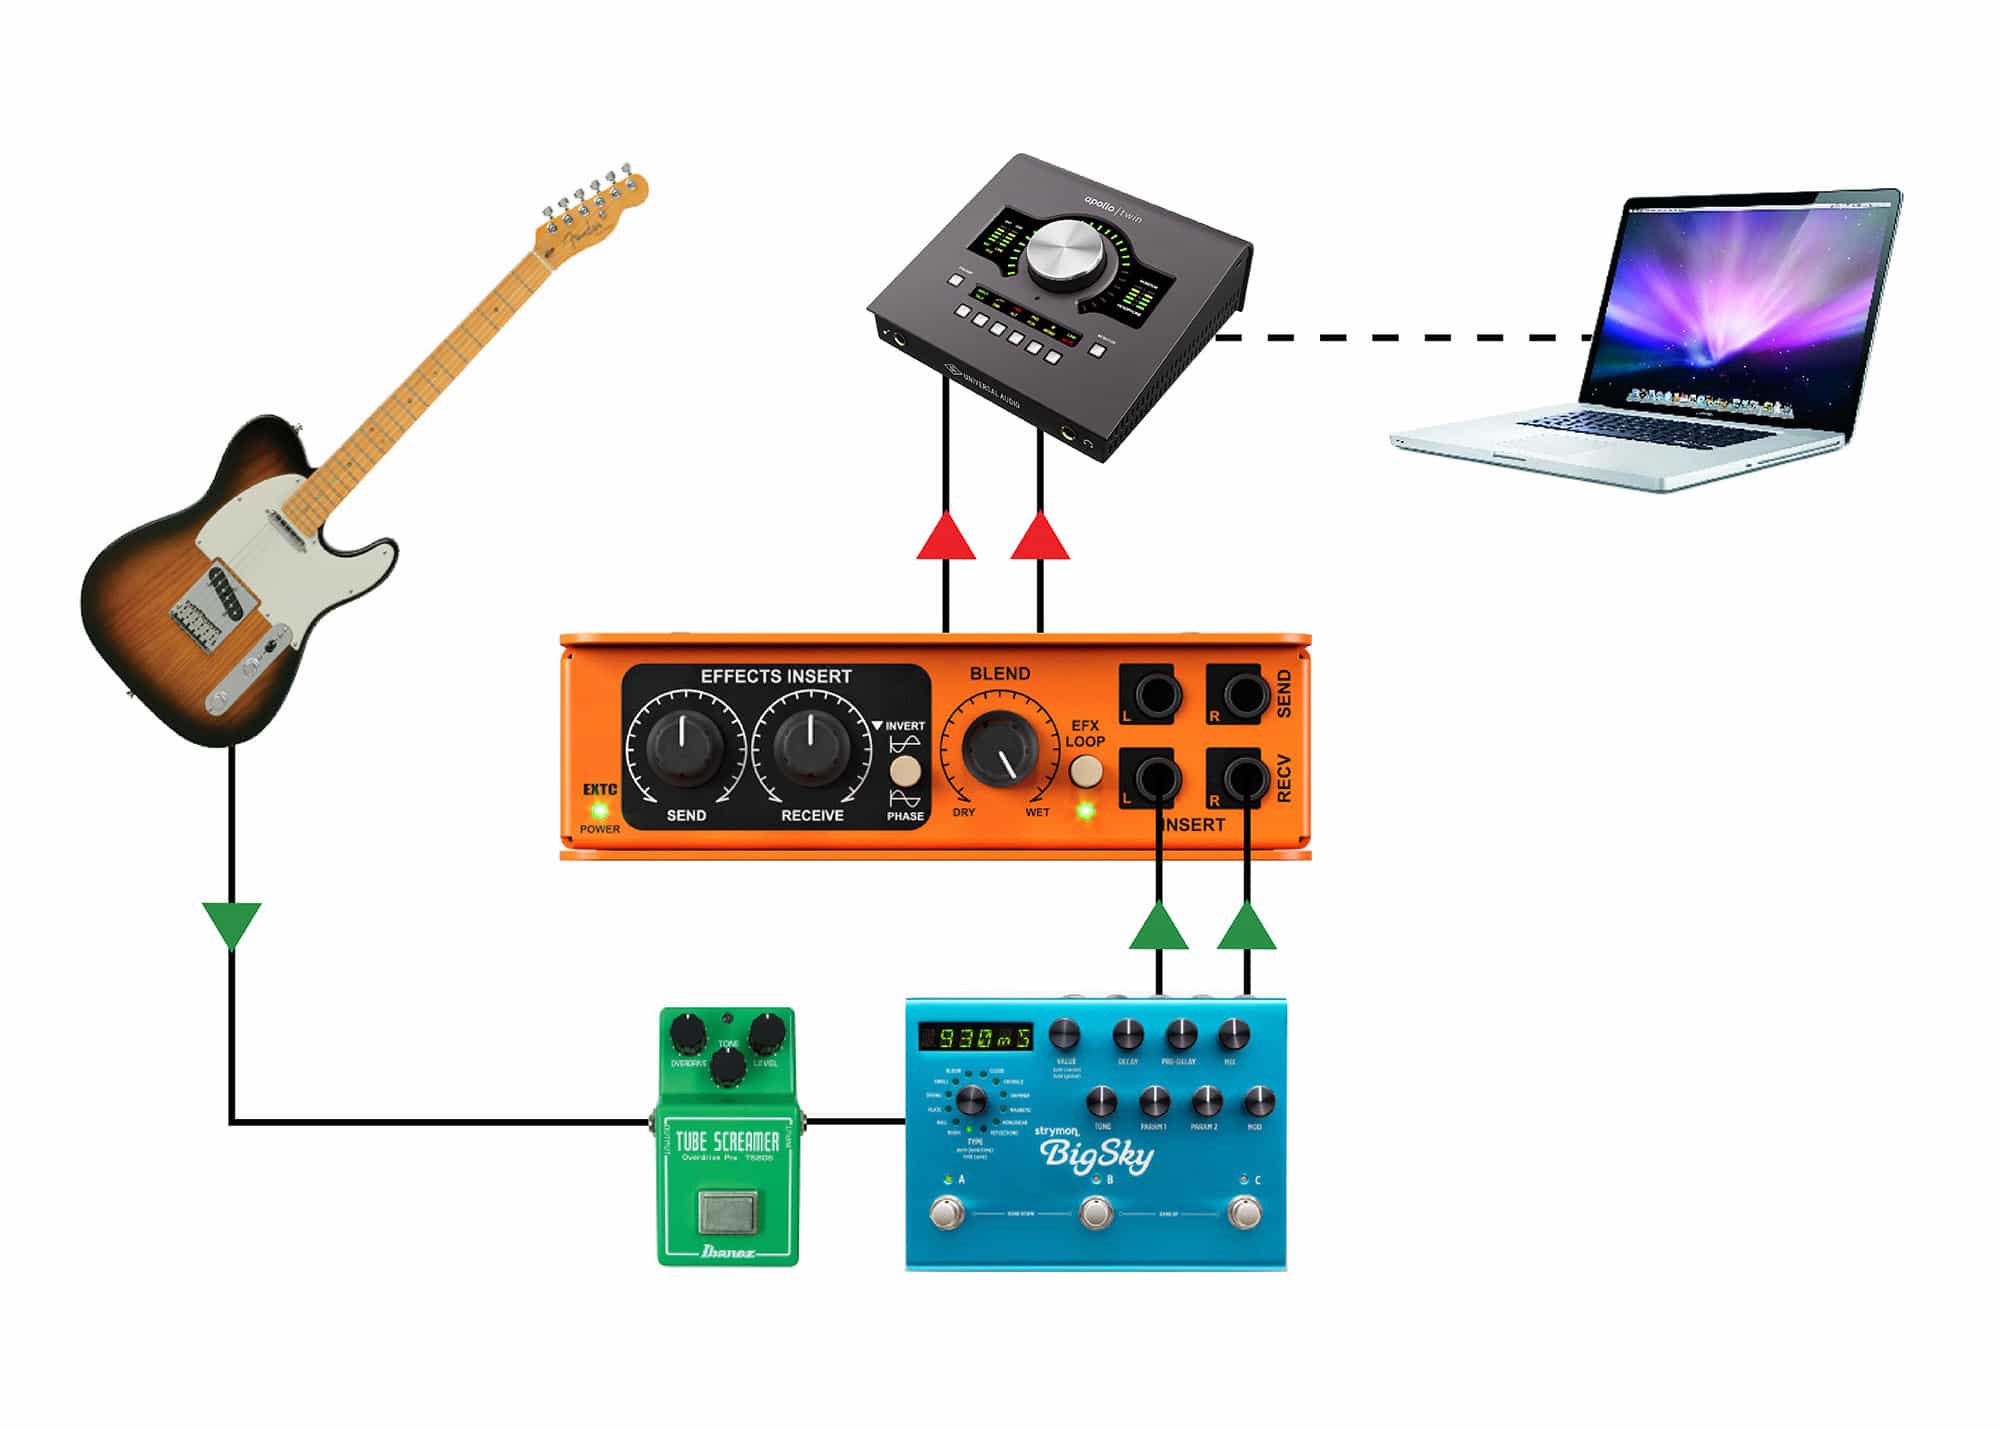 EXTC-Stereo: Recording direct from a pedalboard